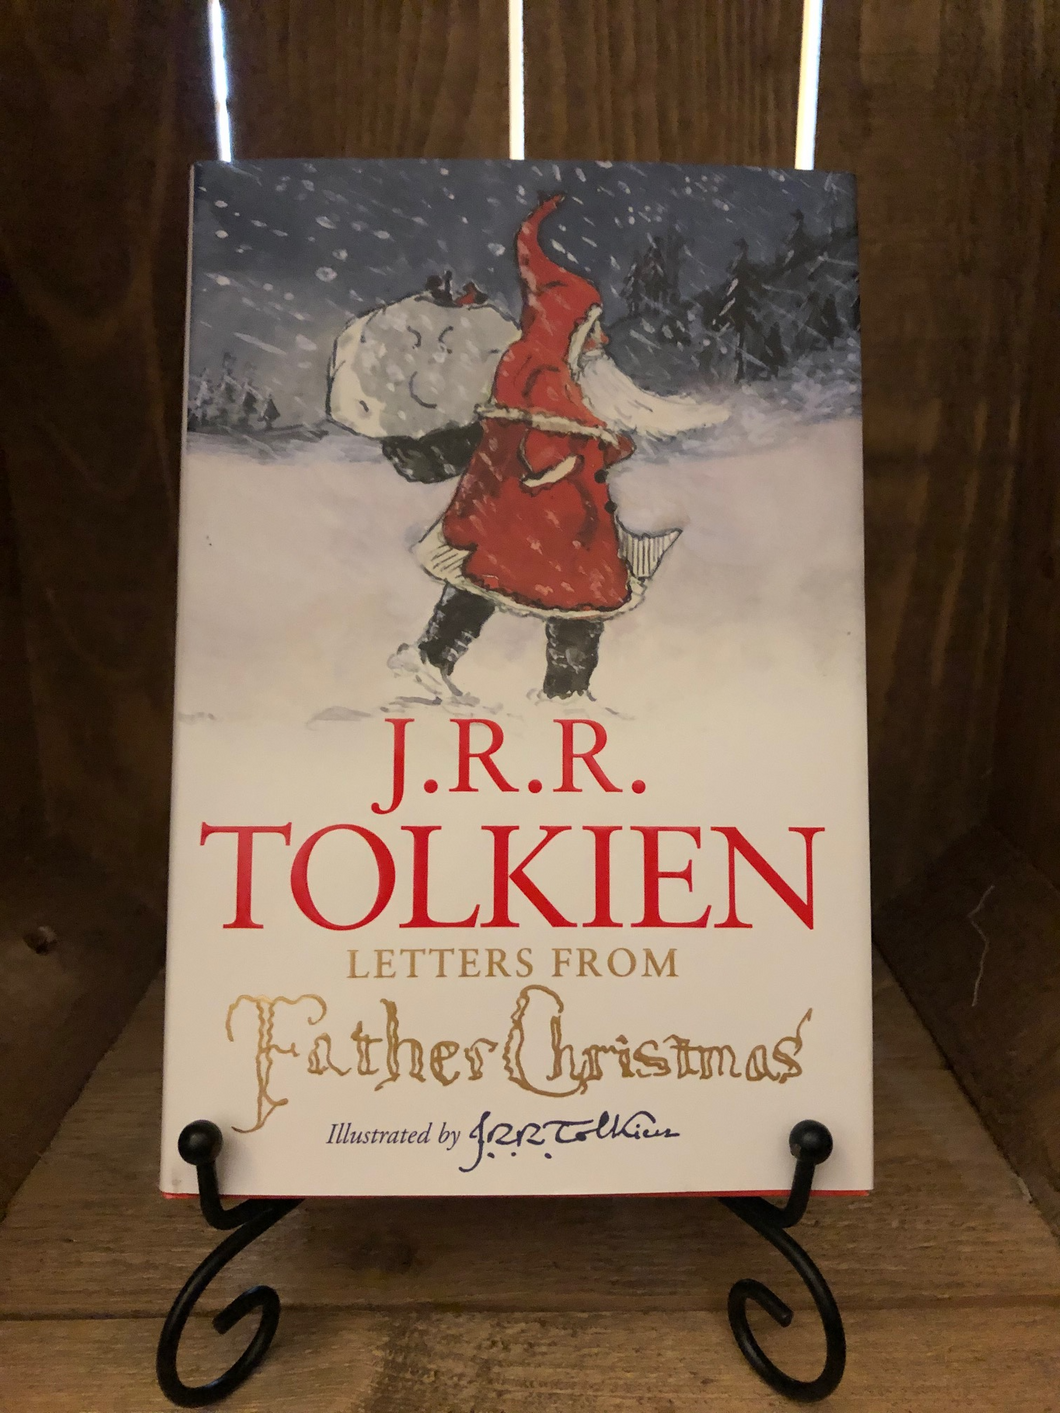 Image of the hardback book Letters From Father Christmas written by J R R Tolkien as included in the Gift Box to Mull Over